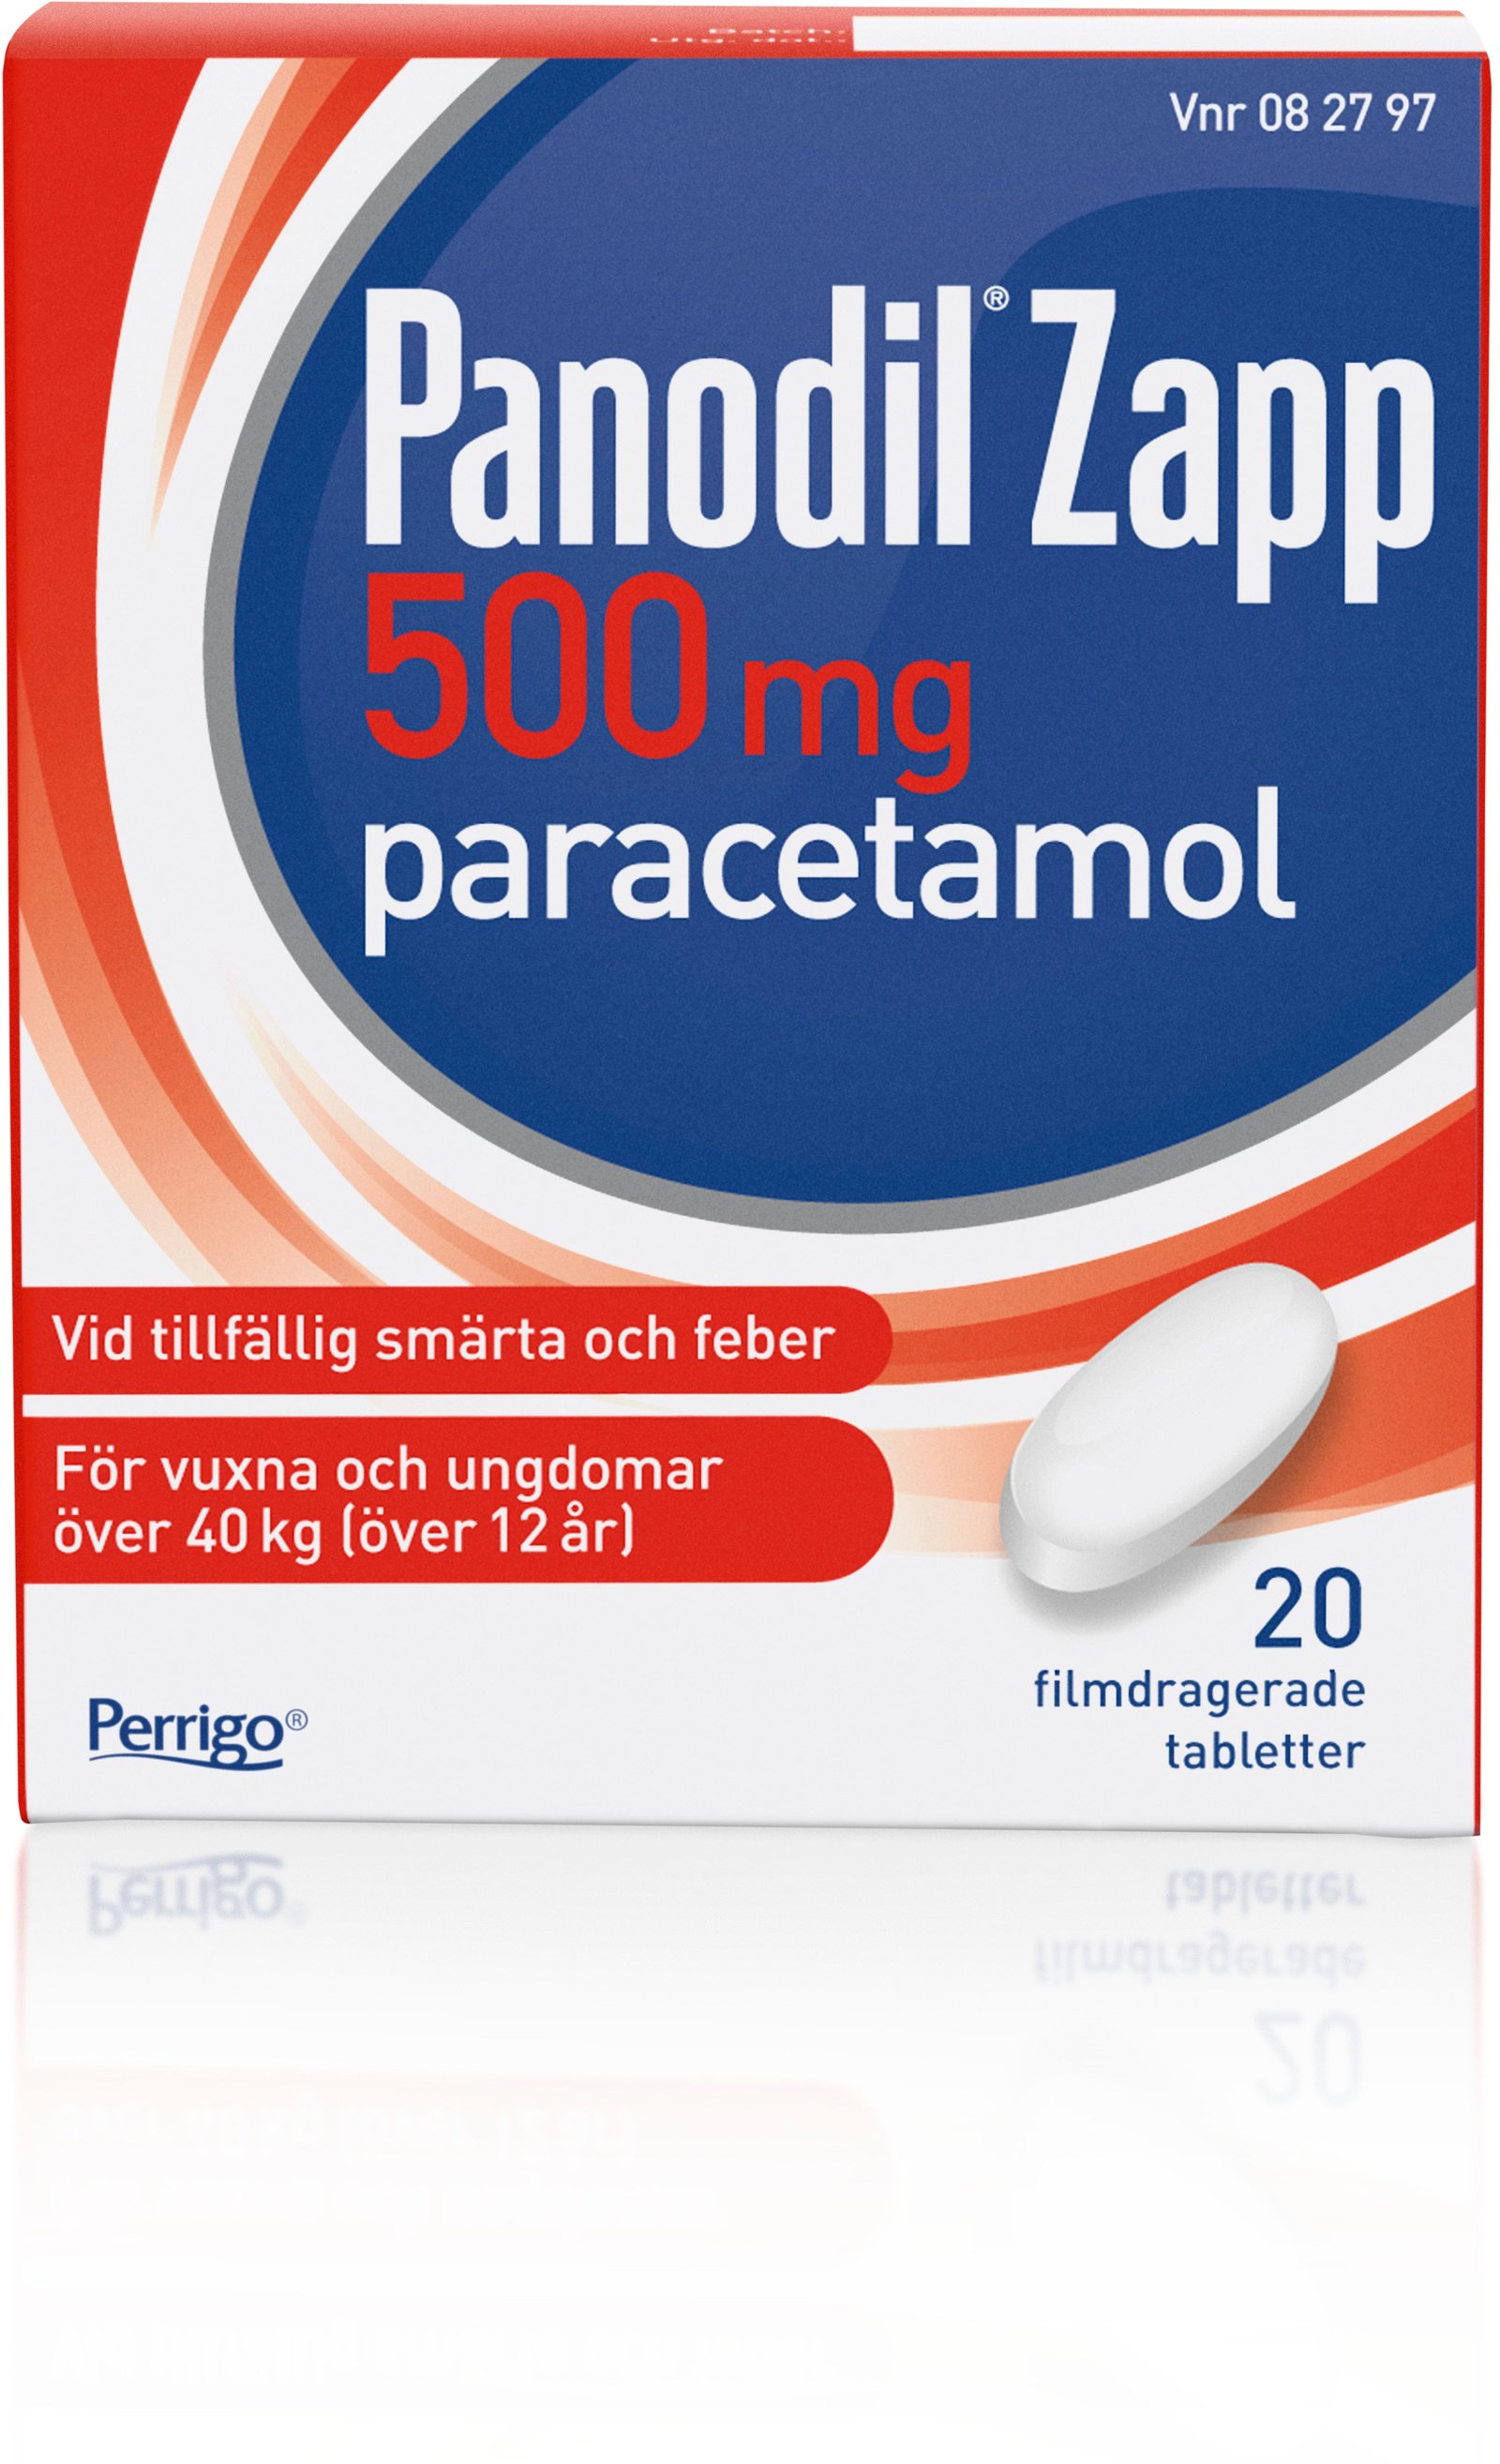 Panodil Zapp 500mg 20 tabletter